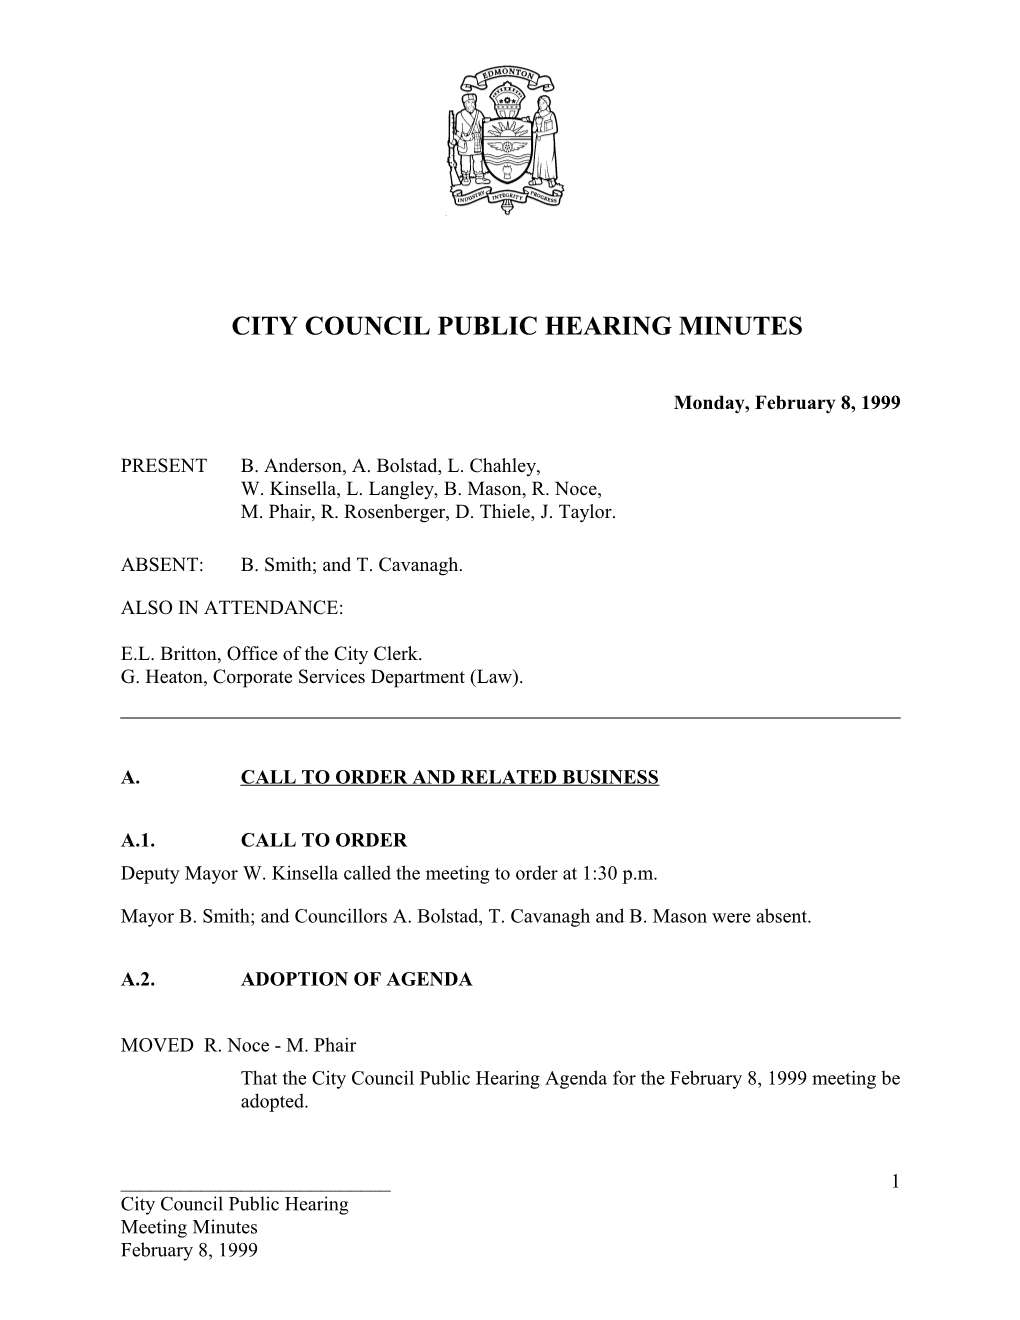 Minutes for City Council February 8, 1999 Meeting